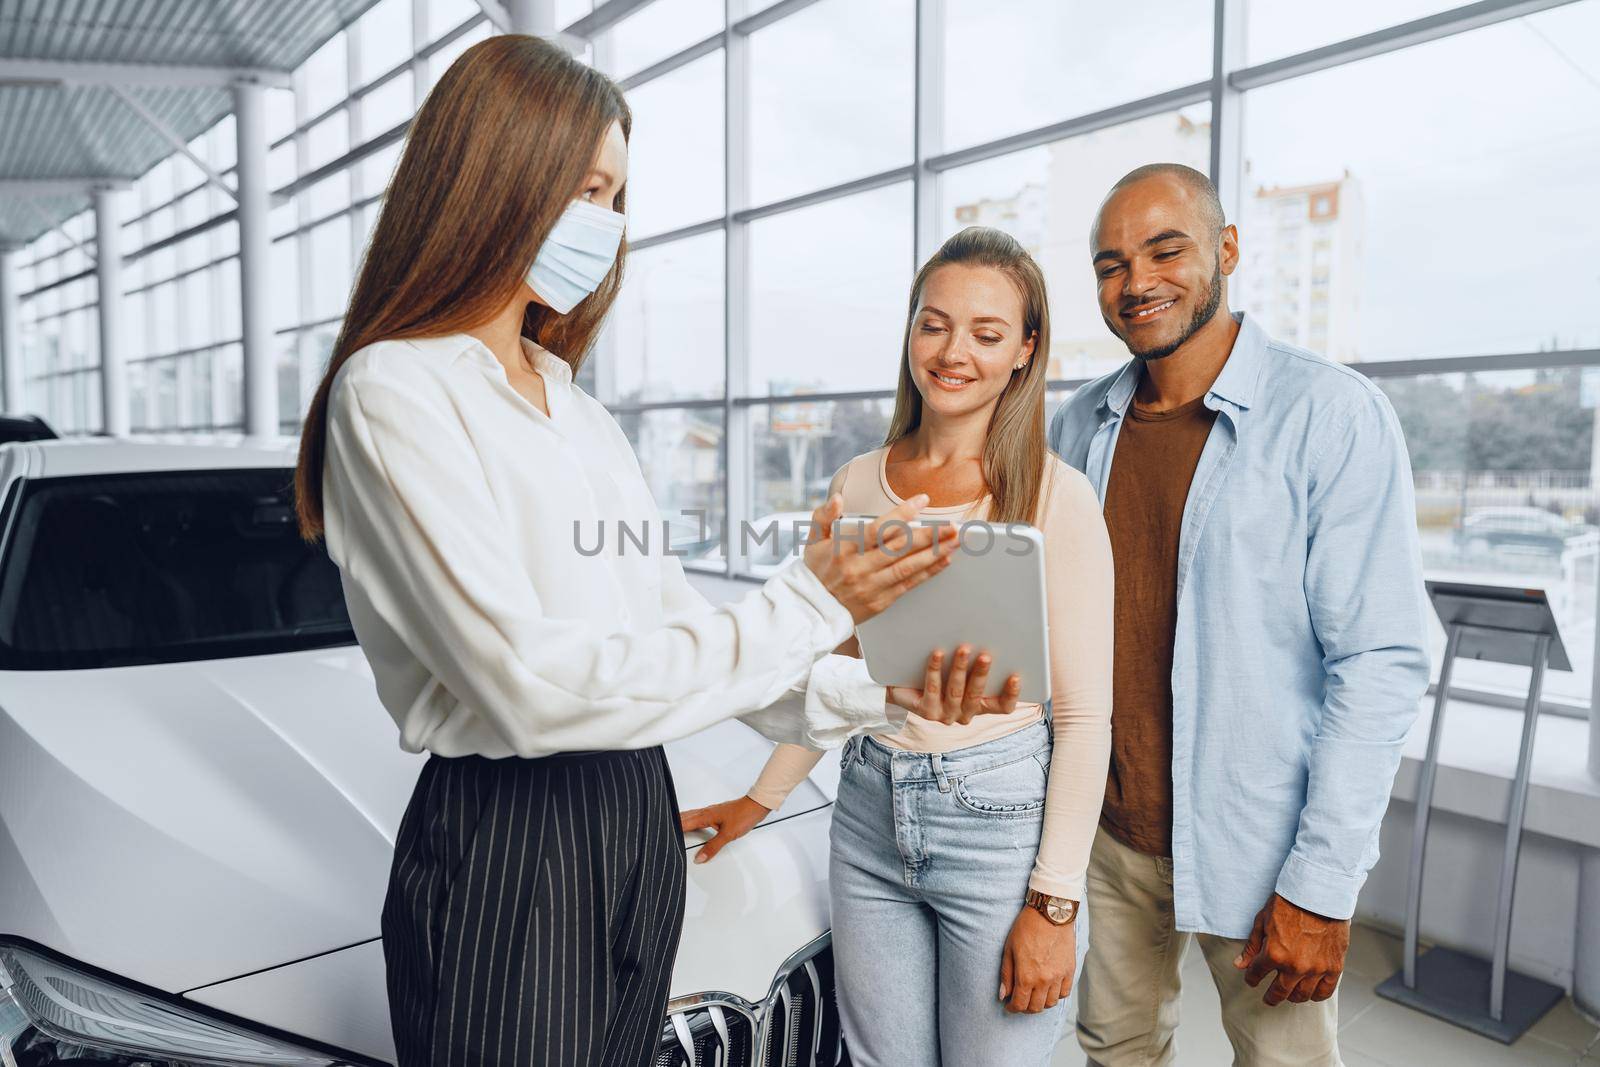 Car saleswoman wearing medical mask shows buyers couple something on digital tablet by Fabrikasimf